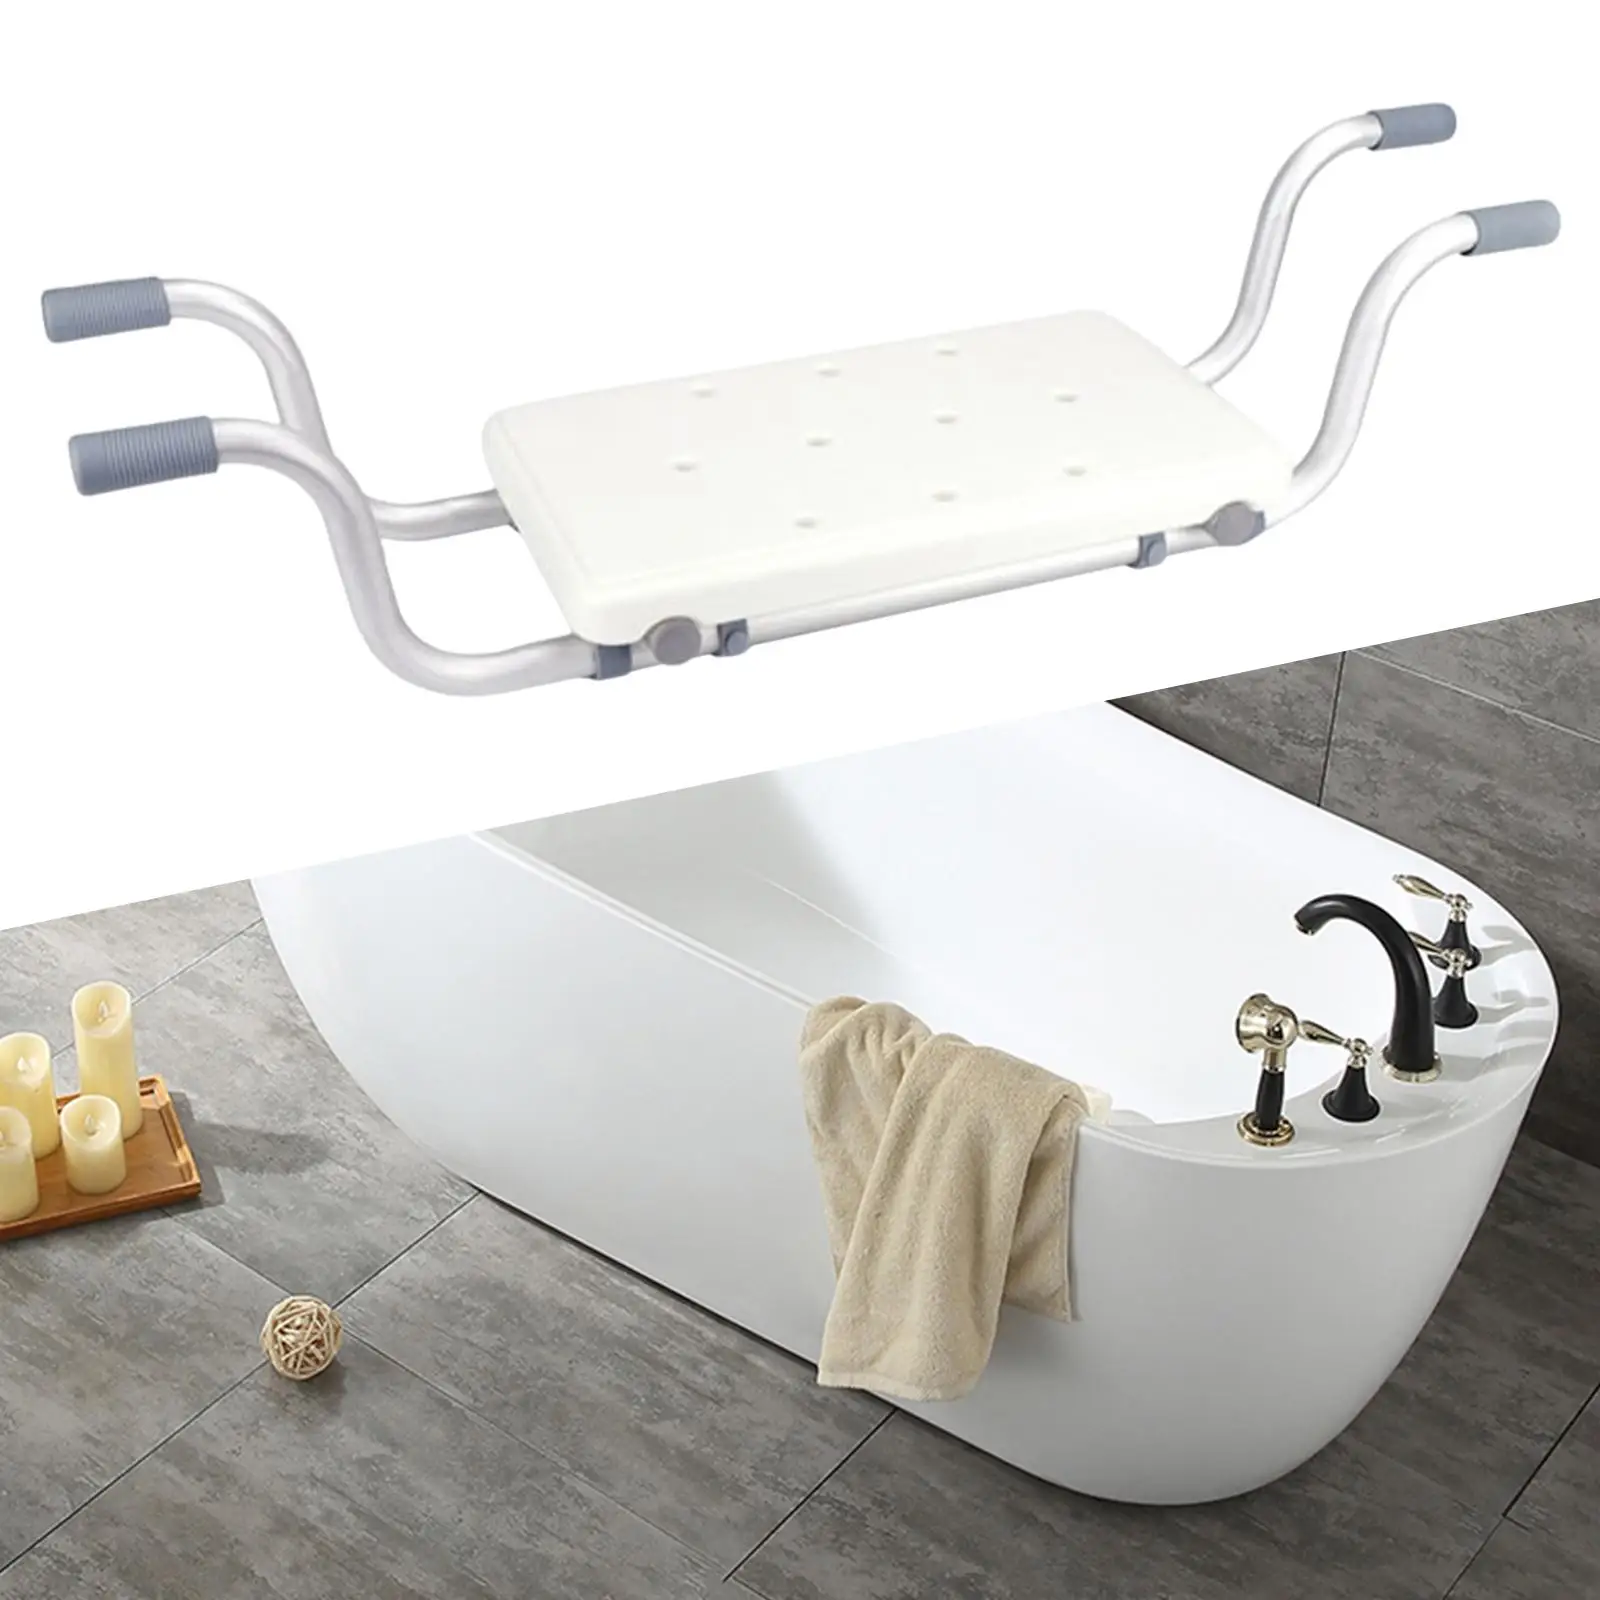 Aluminium Bath Bench Suspended up to 300lbs Bathing Aid Support Tray Bathtub Tray for Sturdy and Comfortable Easy Assembly White